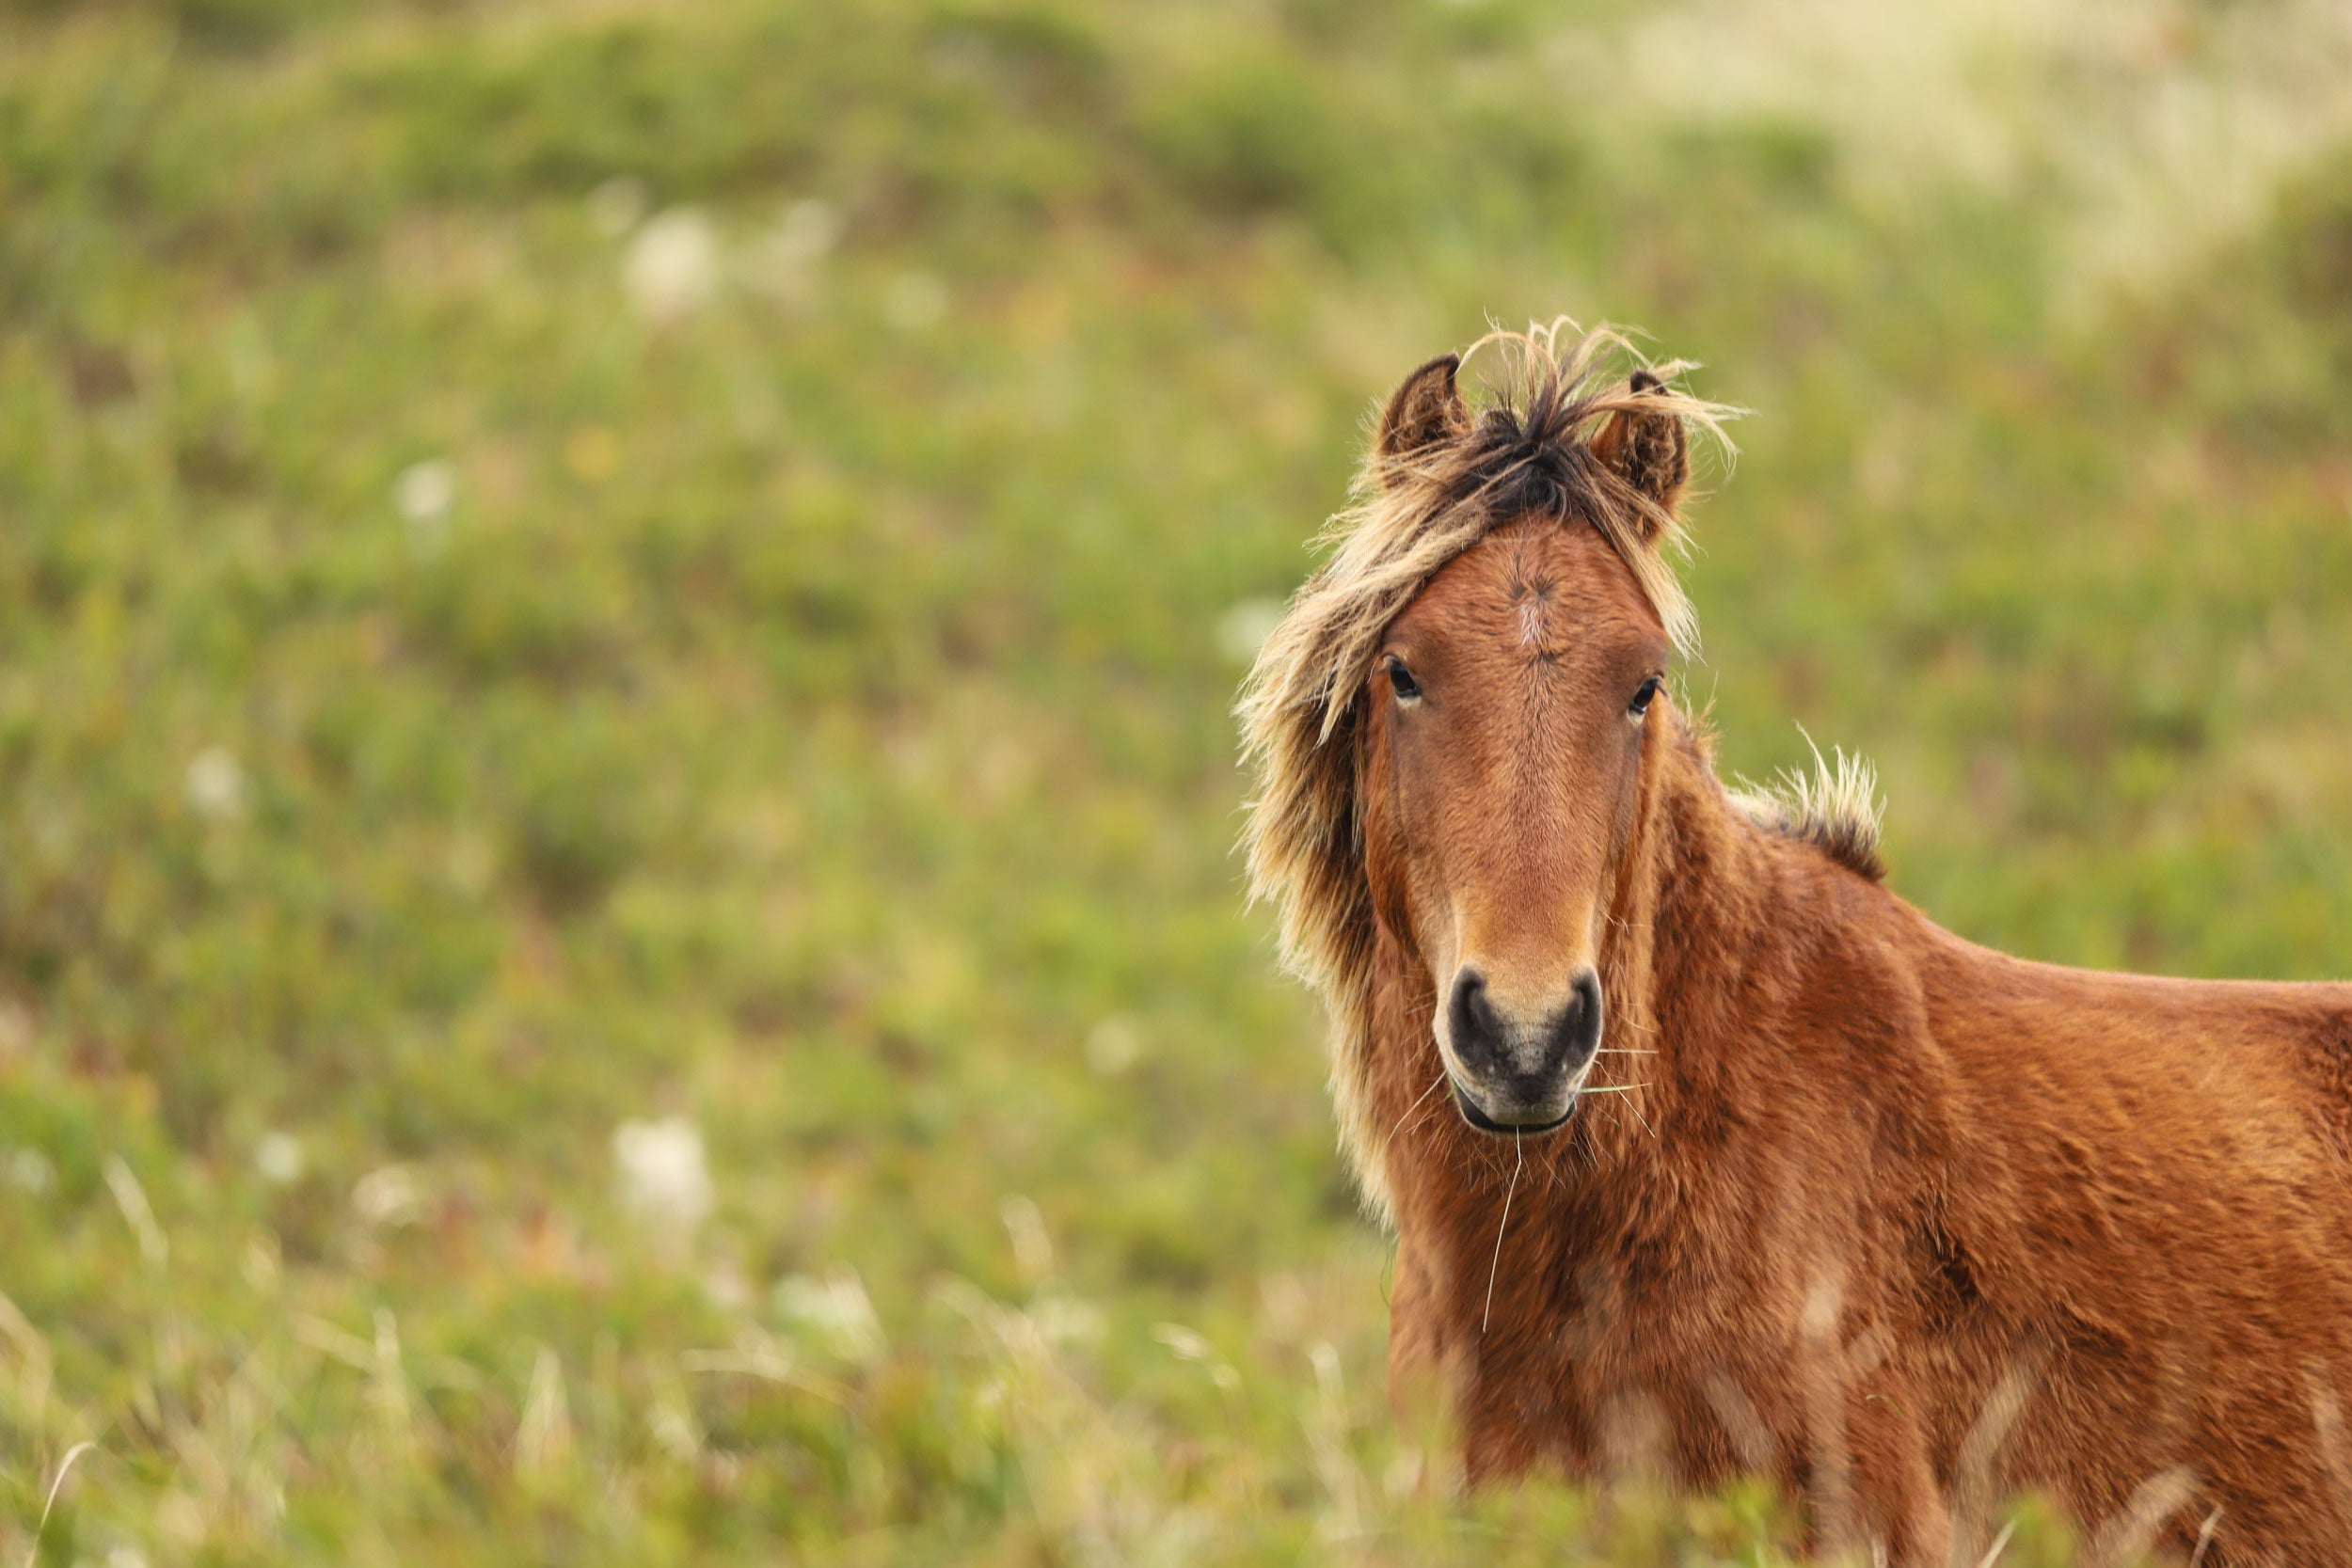 Sable Island’s famous wild horses are at the heart of a conservation controversy